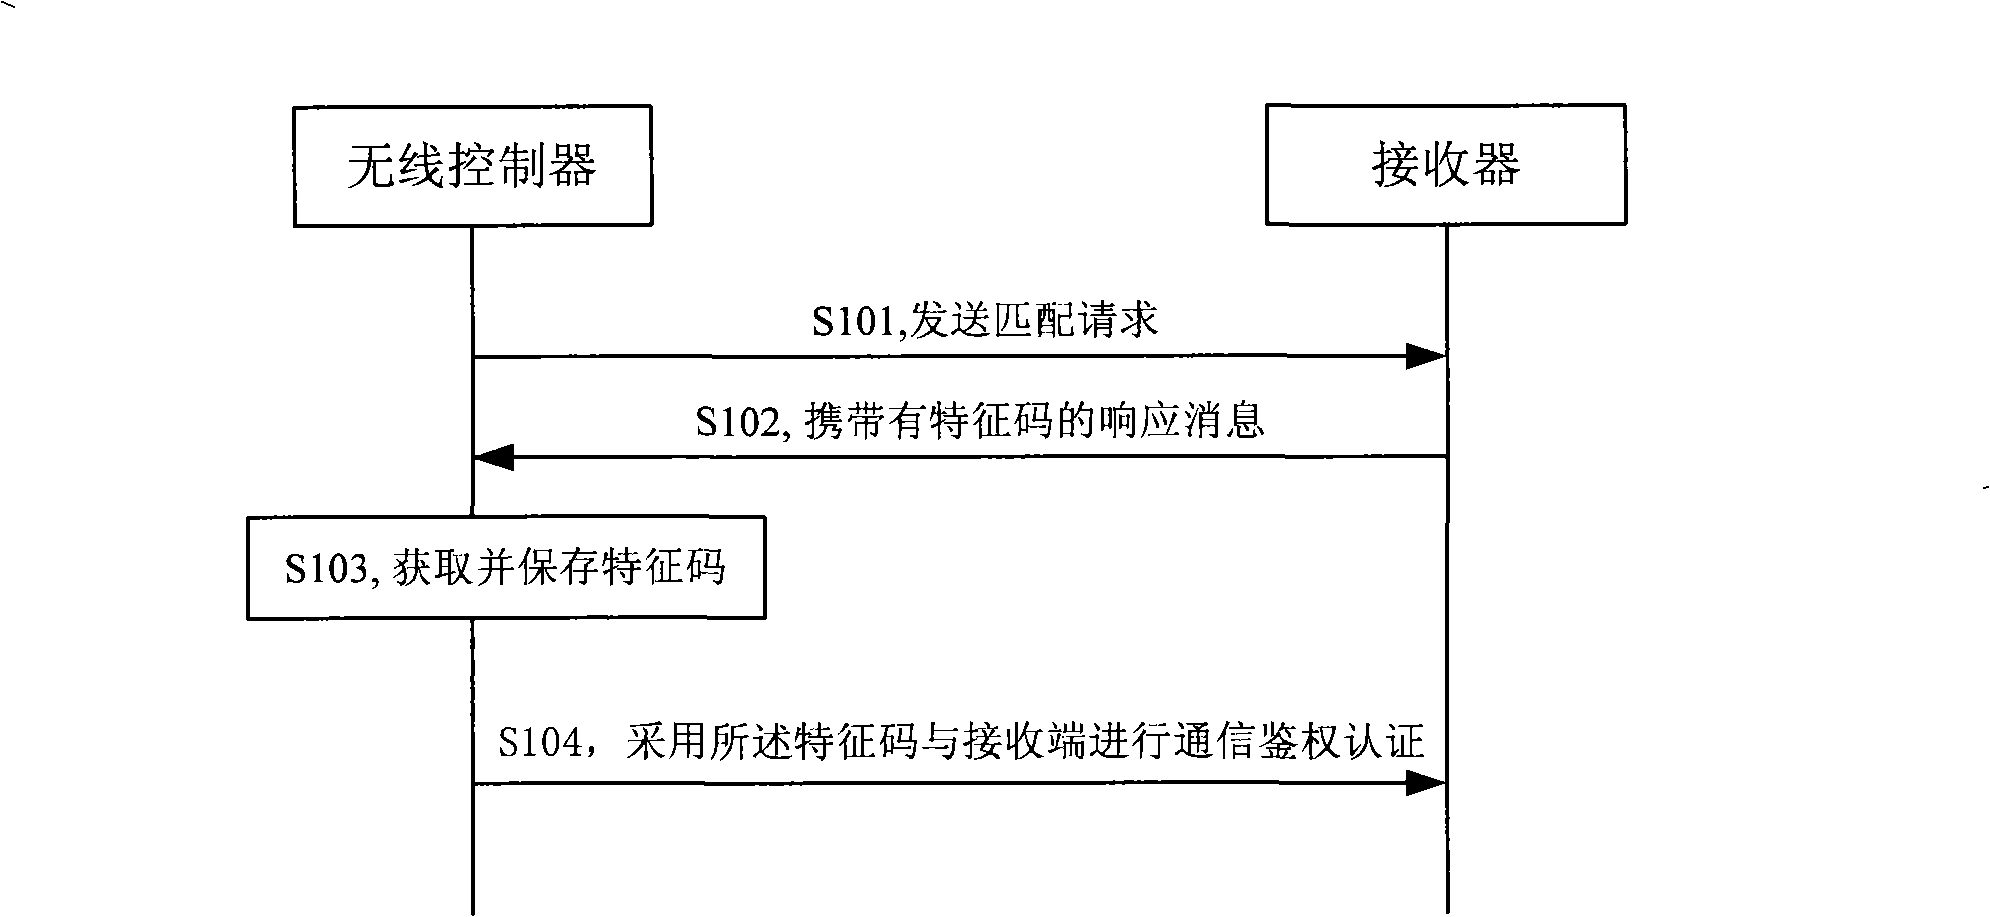 Matching authentication method, apparatus and system for radio communication apparatus